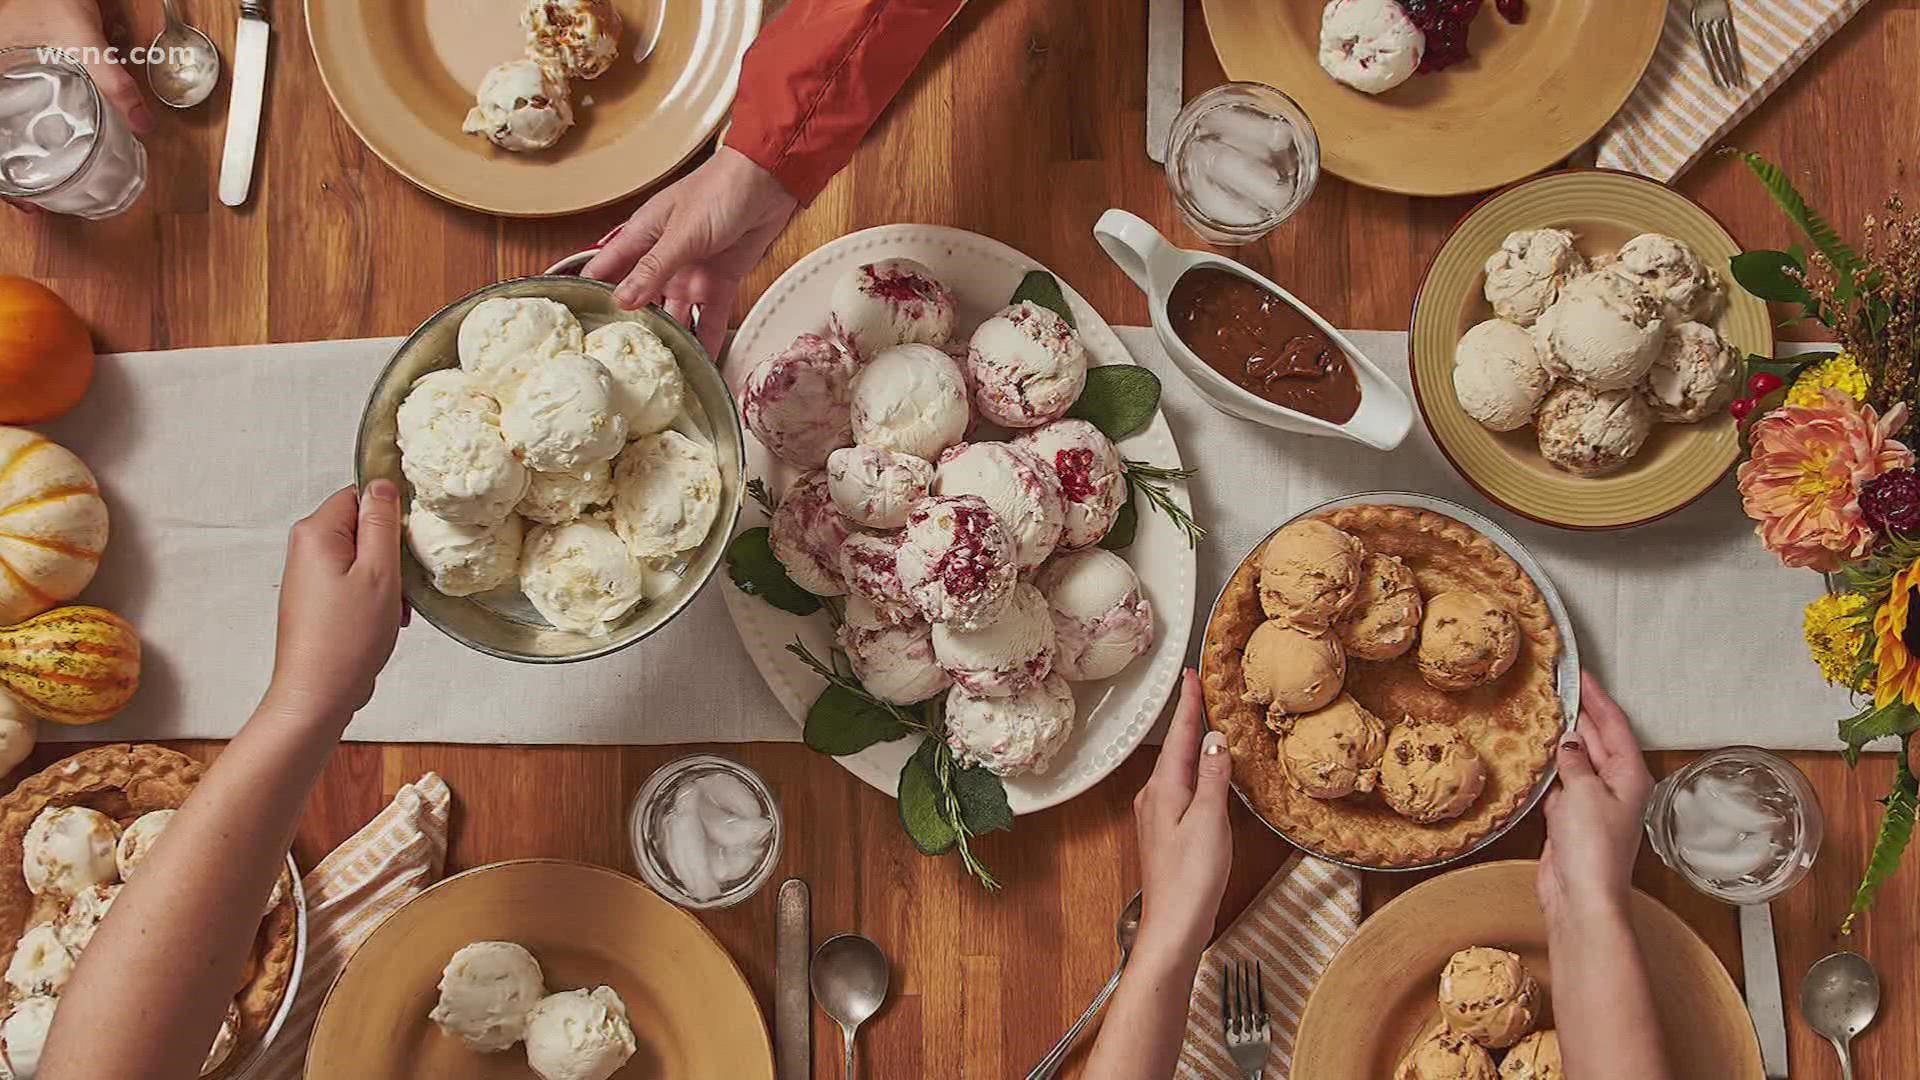 Flavors include caramelized turkey and cranberry sauce together, Parker House Rolls with salted buttercream, candied walnut cheesecake, sweet potato pie and more.